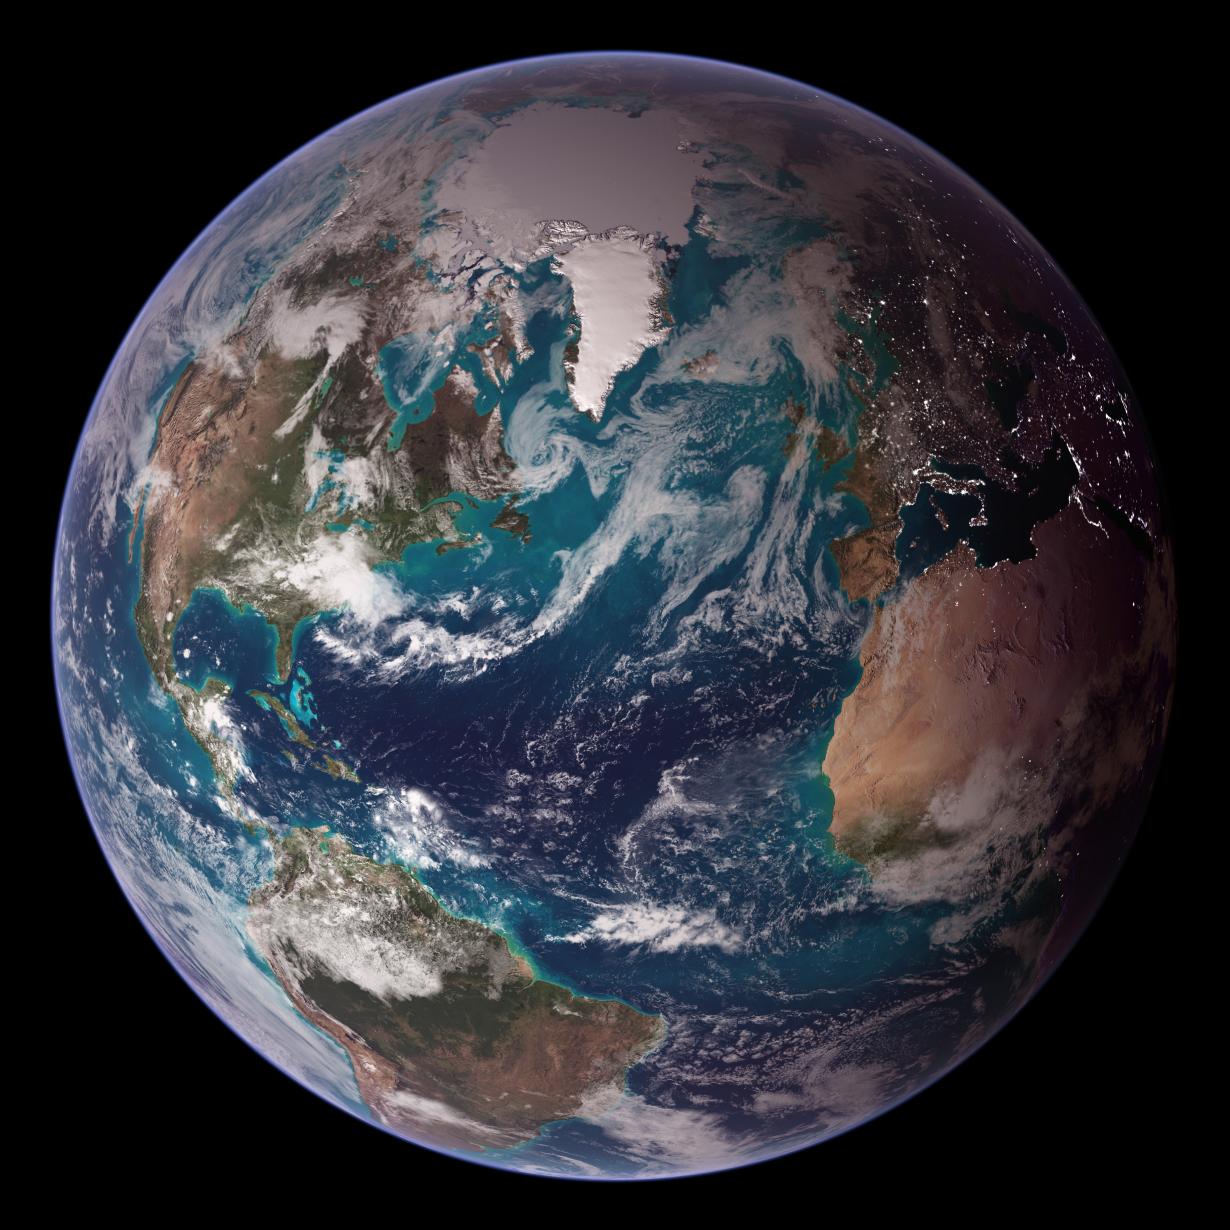 Bluemarble image of the Earth then from space by NASA